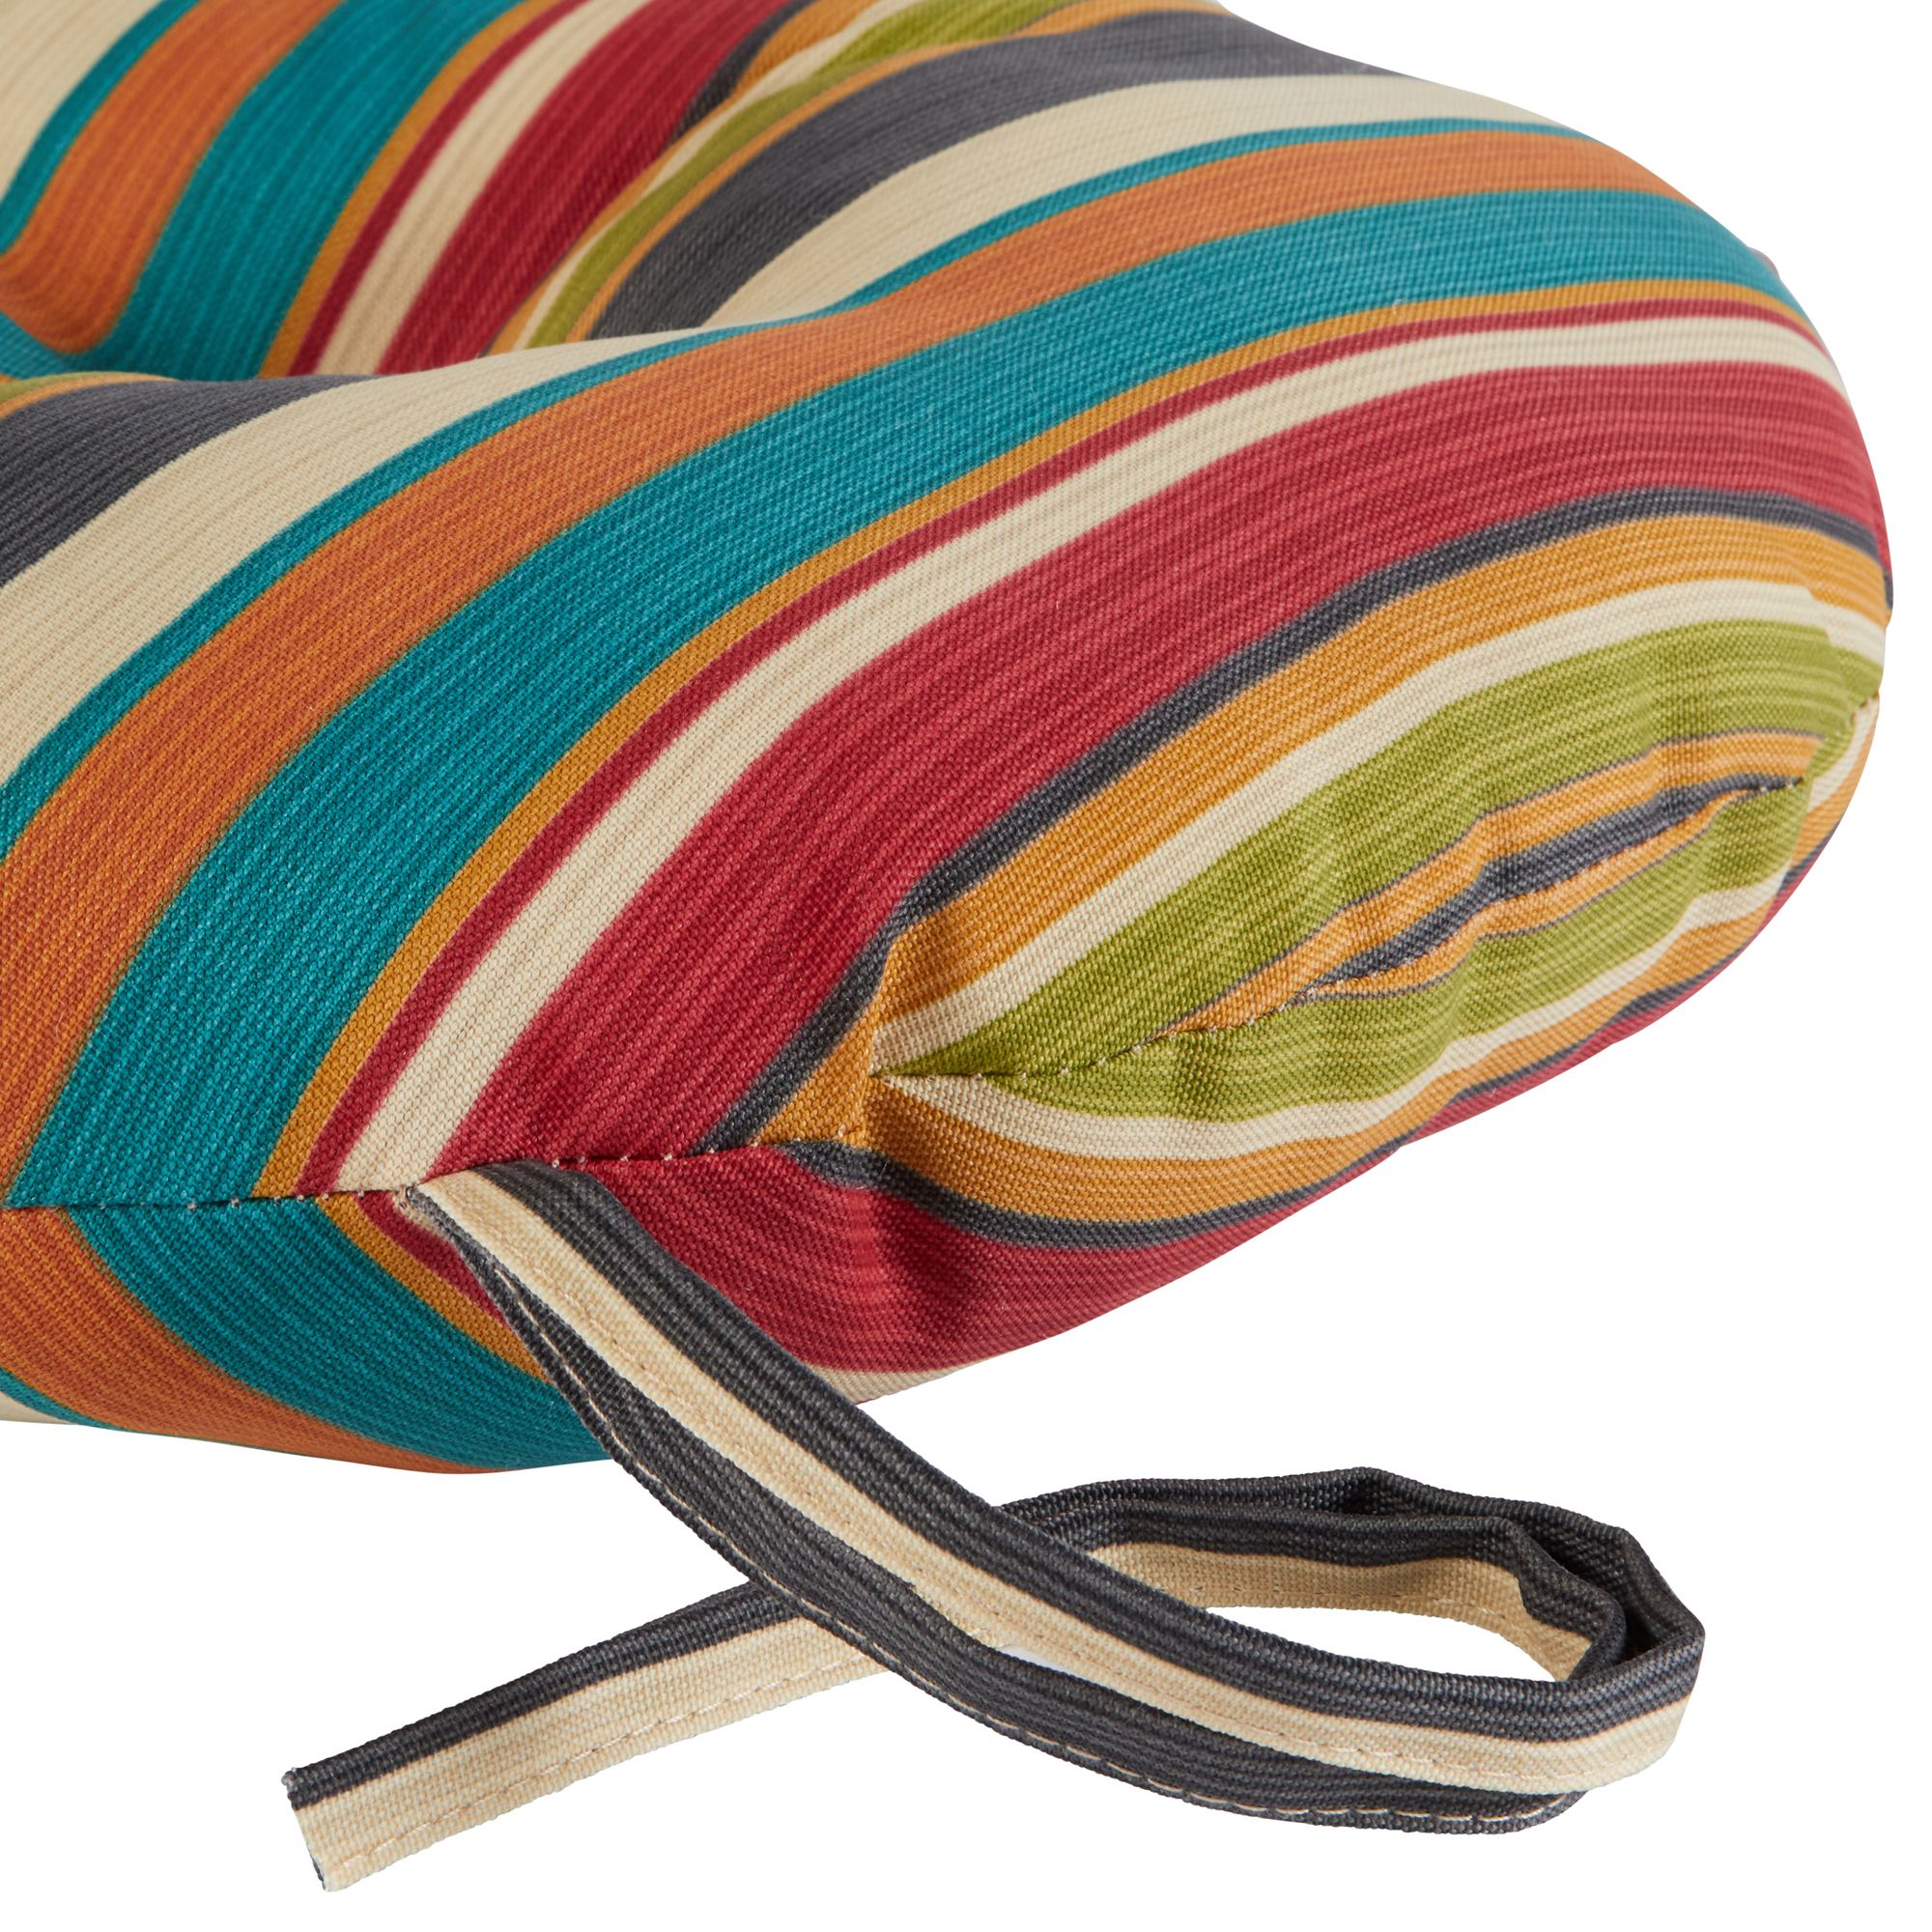 Greendale Home Fashions SunSet Stripe 15 in. Round Outdoor Reversible Bistro Seat Cushion (Set of 2) - image 4 of 6